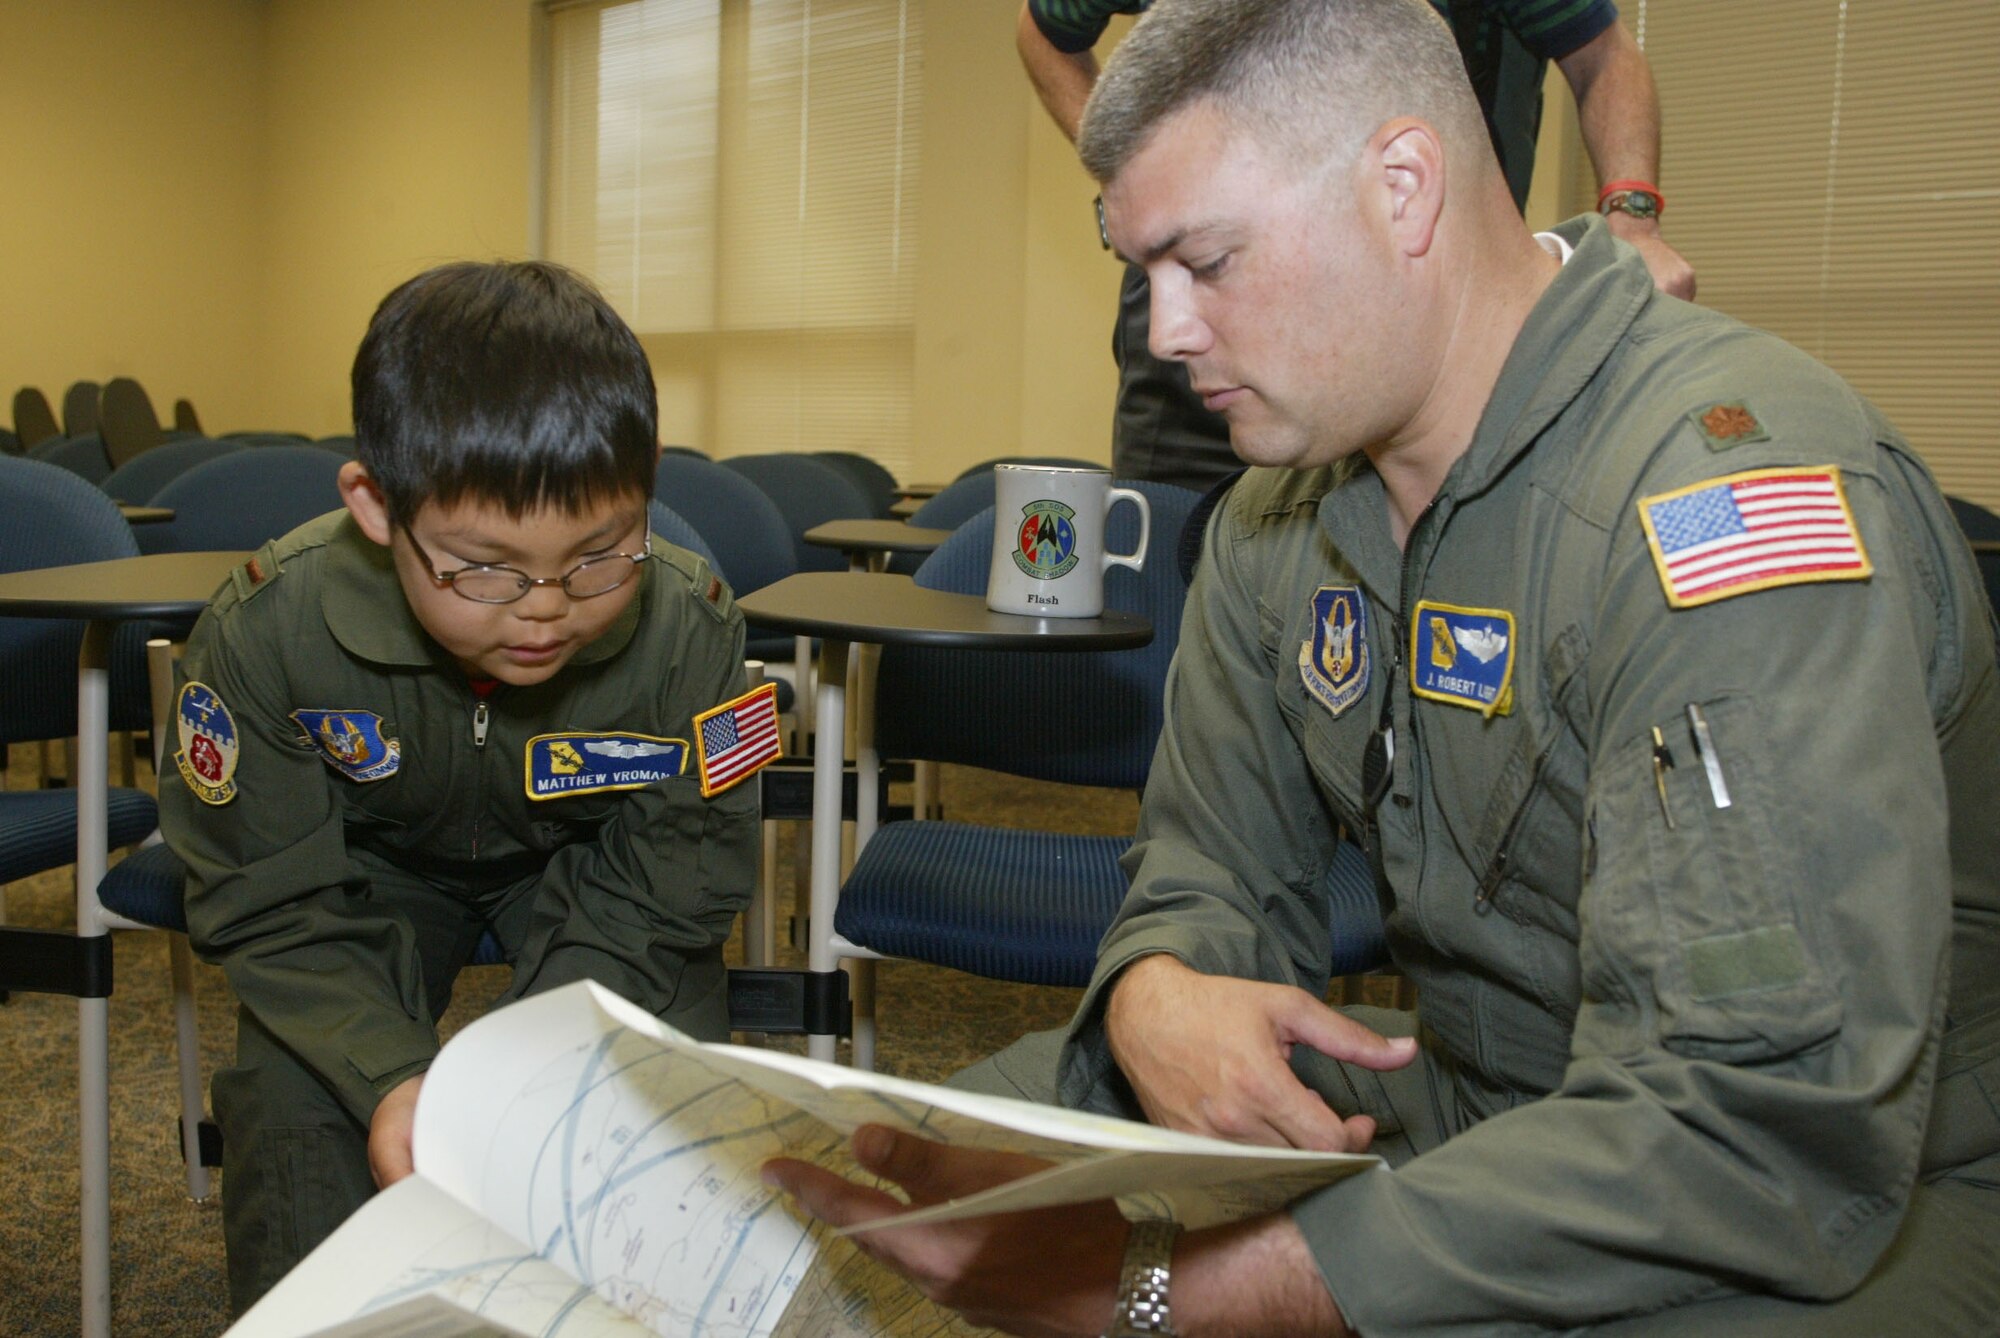 Honorary 2nd Lt. Matthew Vroman reviews a map with Maj. Robert Light as a part of his preflight briefing during a Make-A-Wish event at Dobbins Air Reserve Base, Ga.